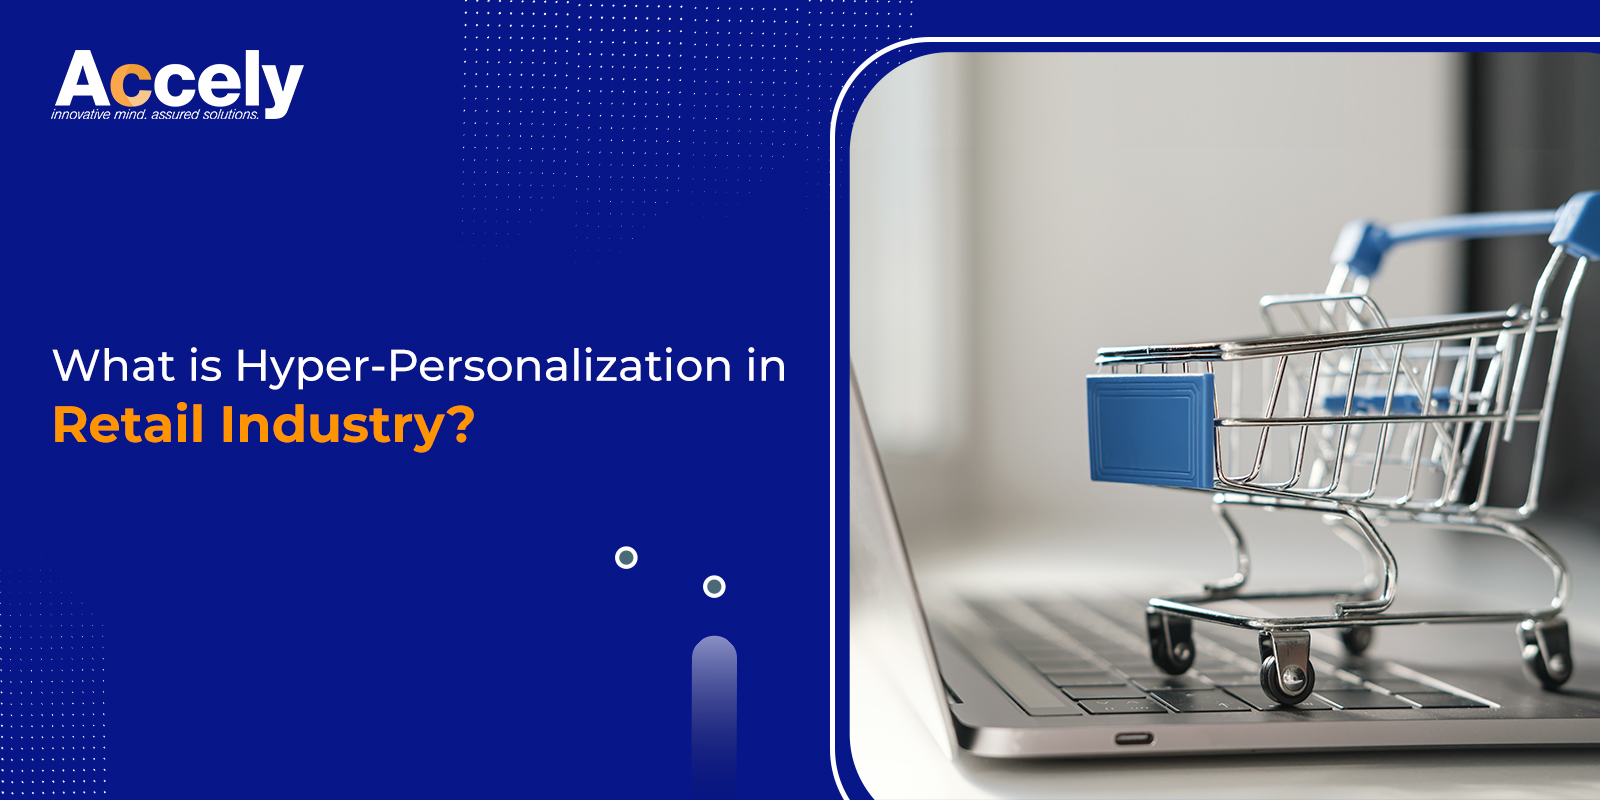 What is Hyper-Personalization in Retail Industry?